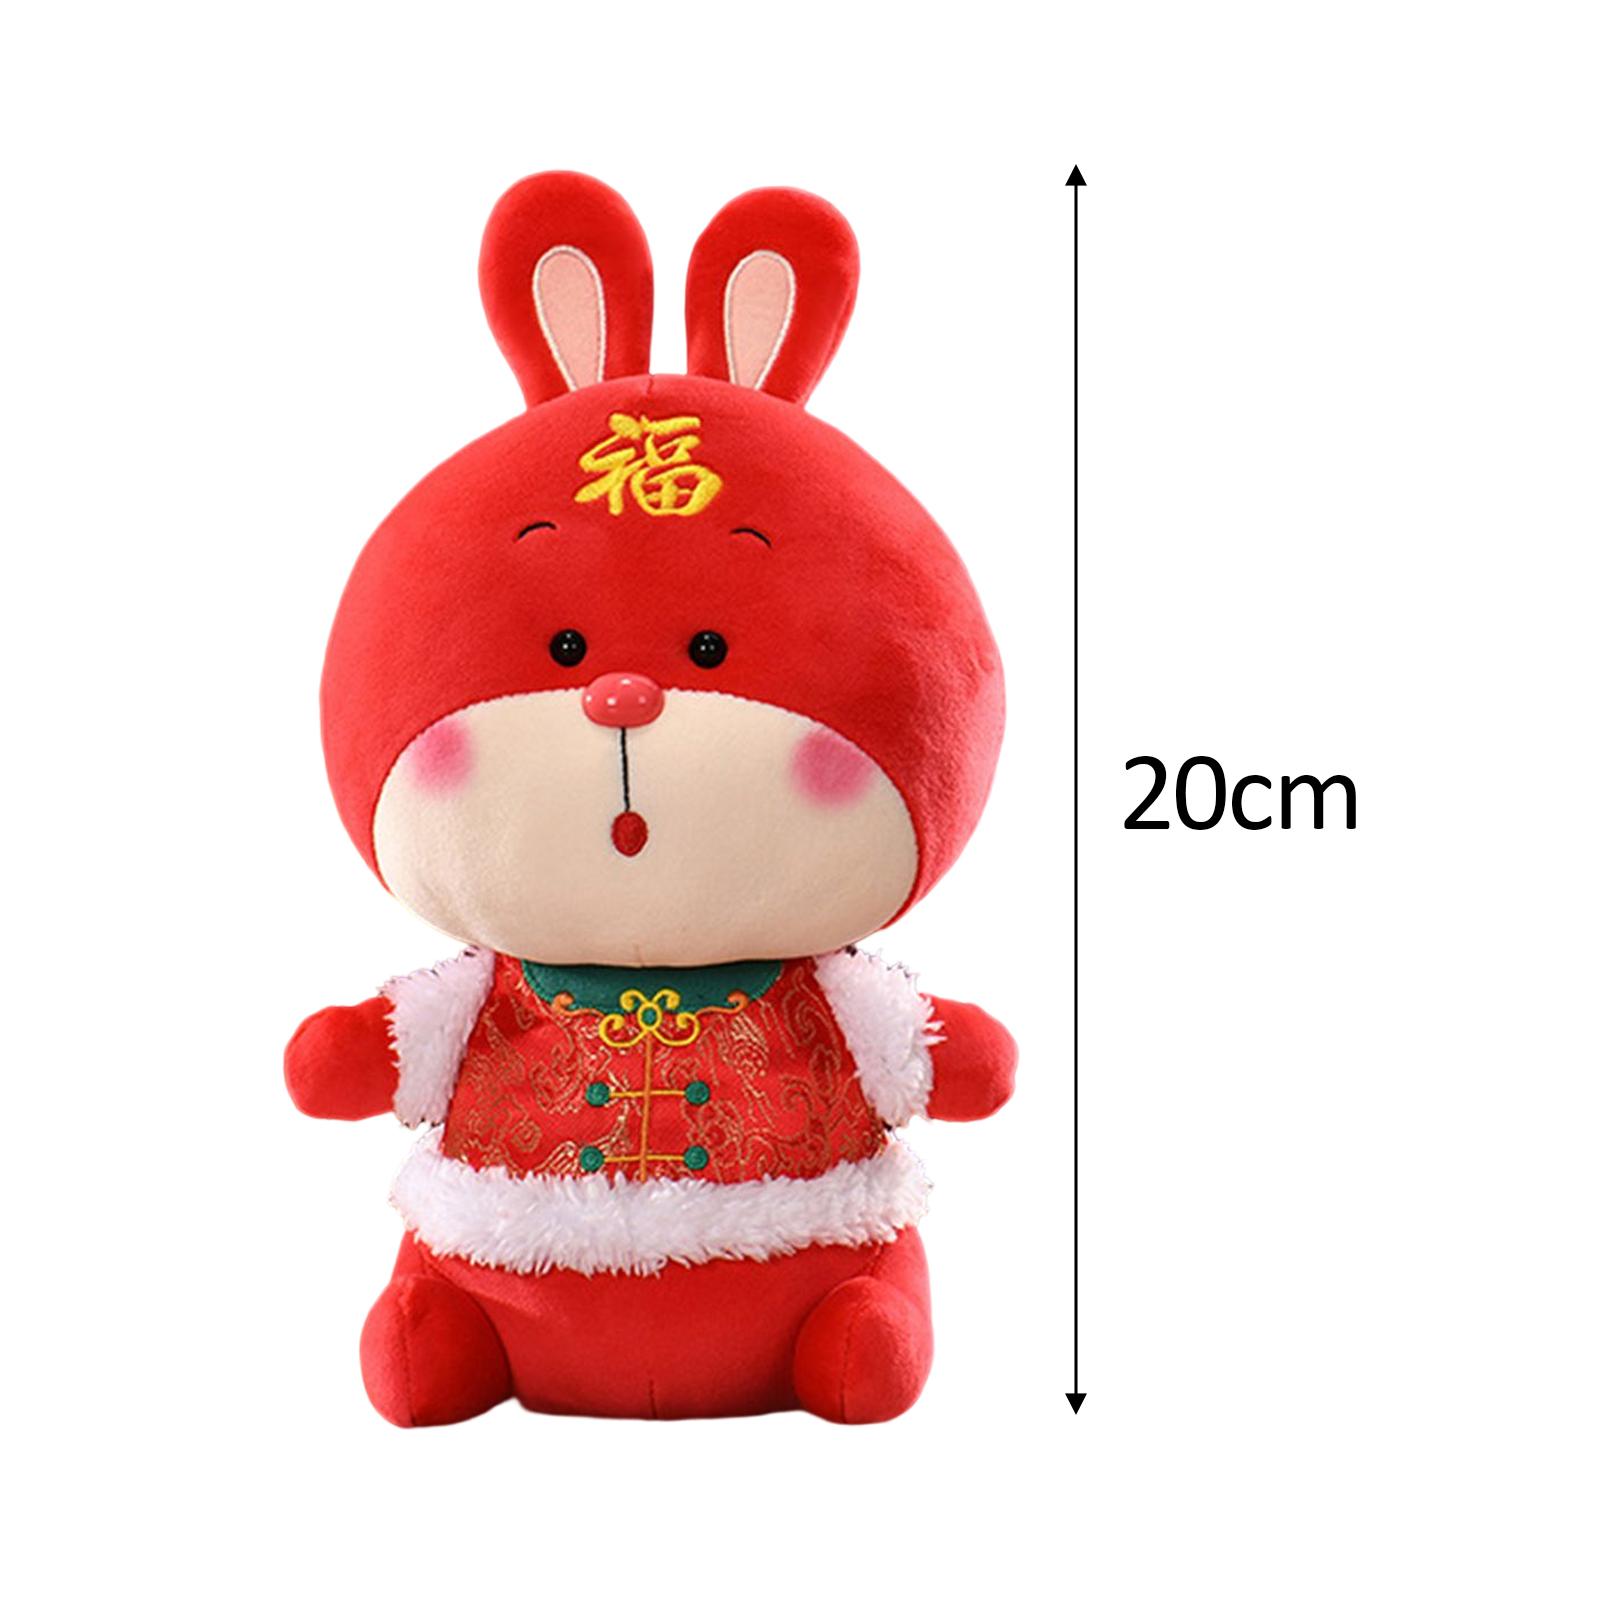 New Year Rabbit Plush Toy Stuffed Animal Bunny for Party Table Decoration 20cm